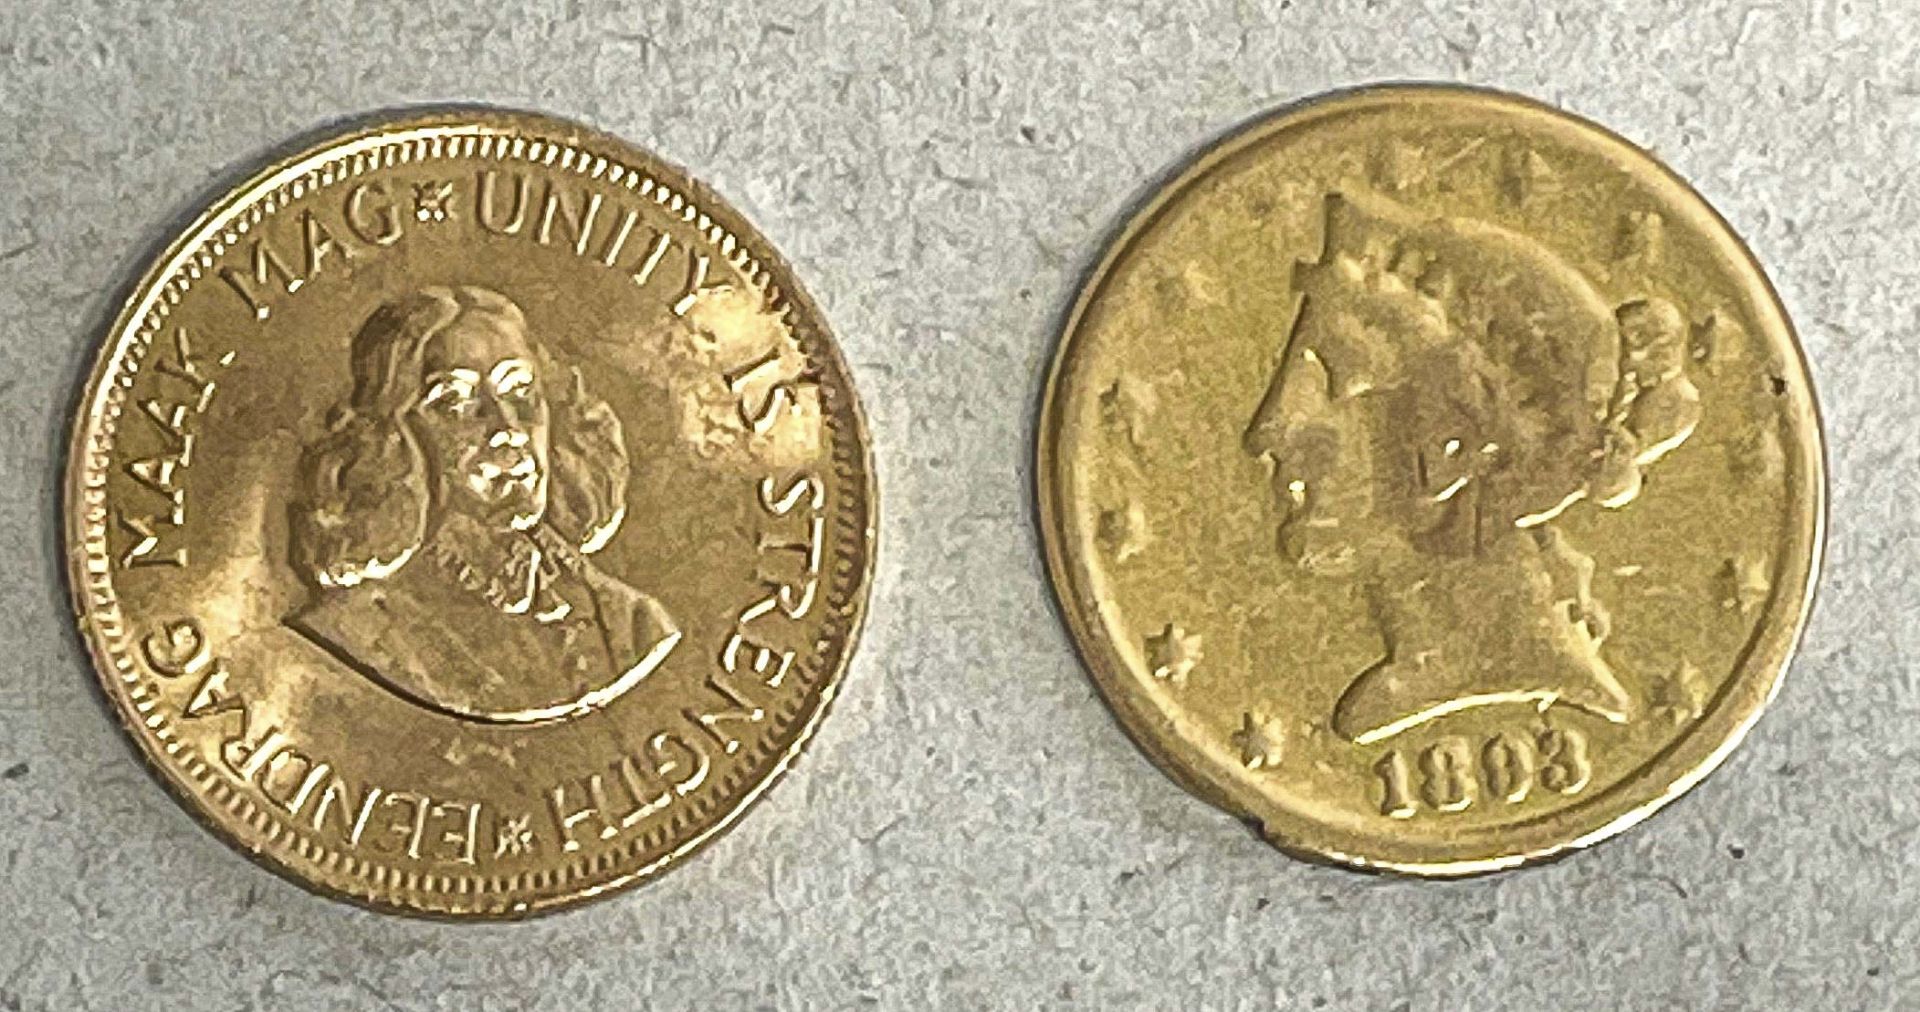 2 gold coins: 1x South Africa, 2 Rand, bust Jan van Riebeck, inscription Unity is strength Eendrag